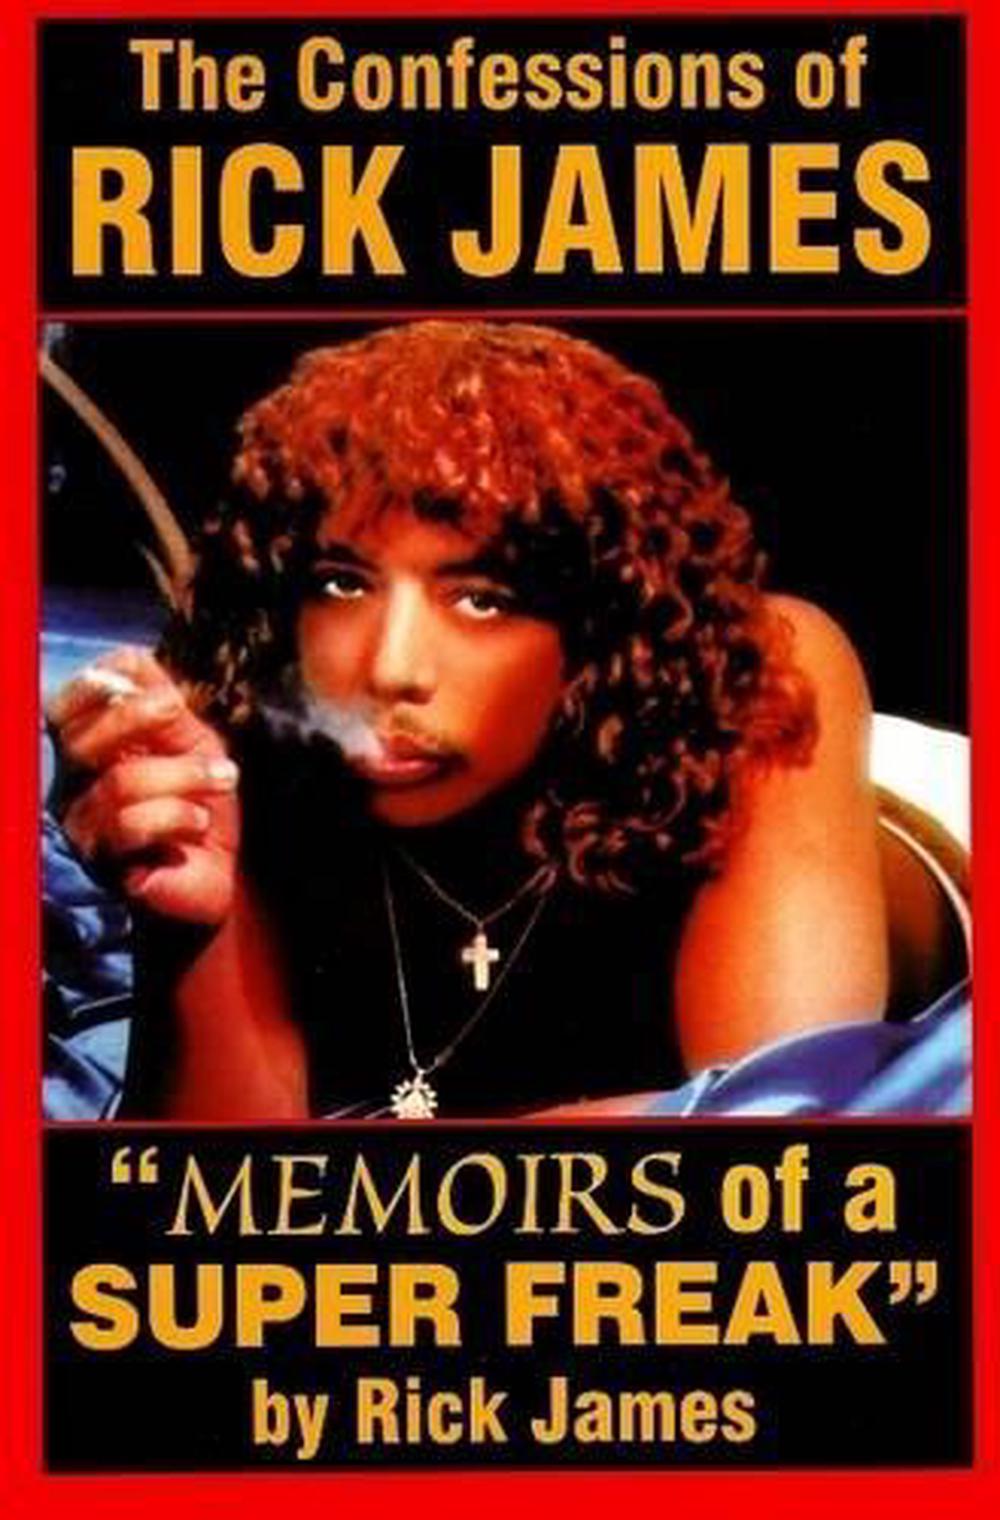 The Confessions of Rick James "Memoirs of a Super Freak" by Rick James